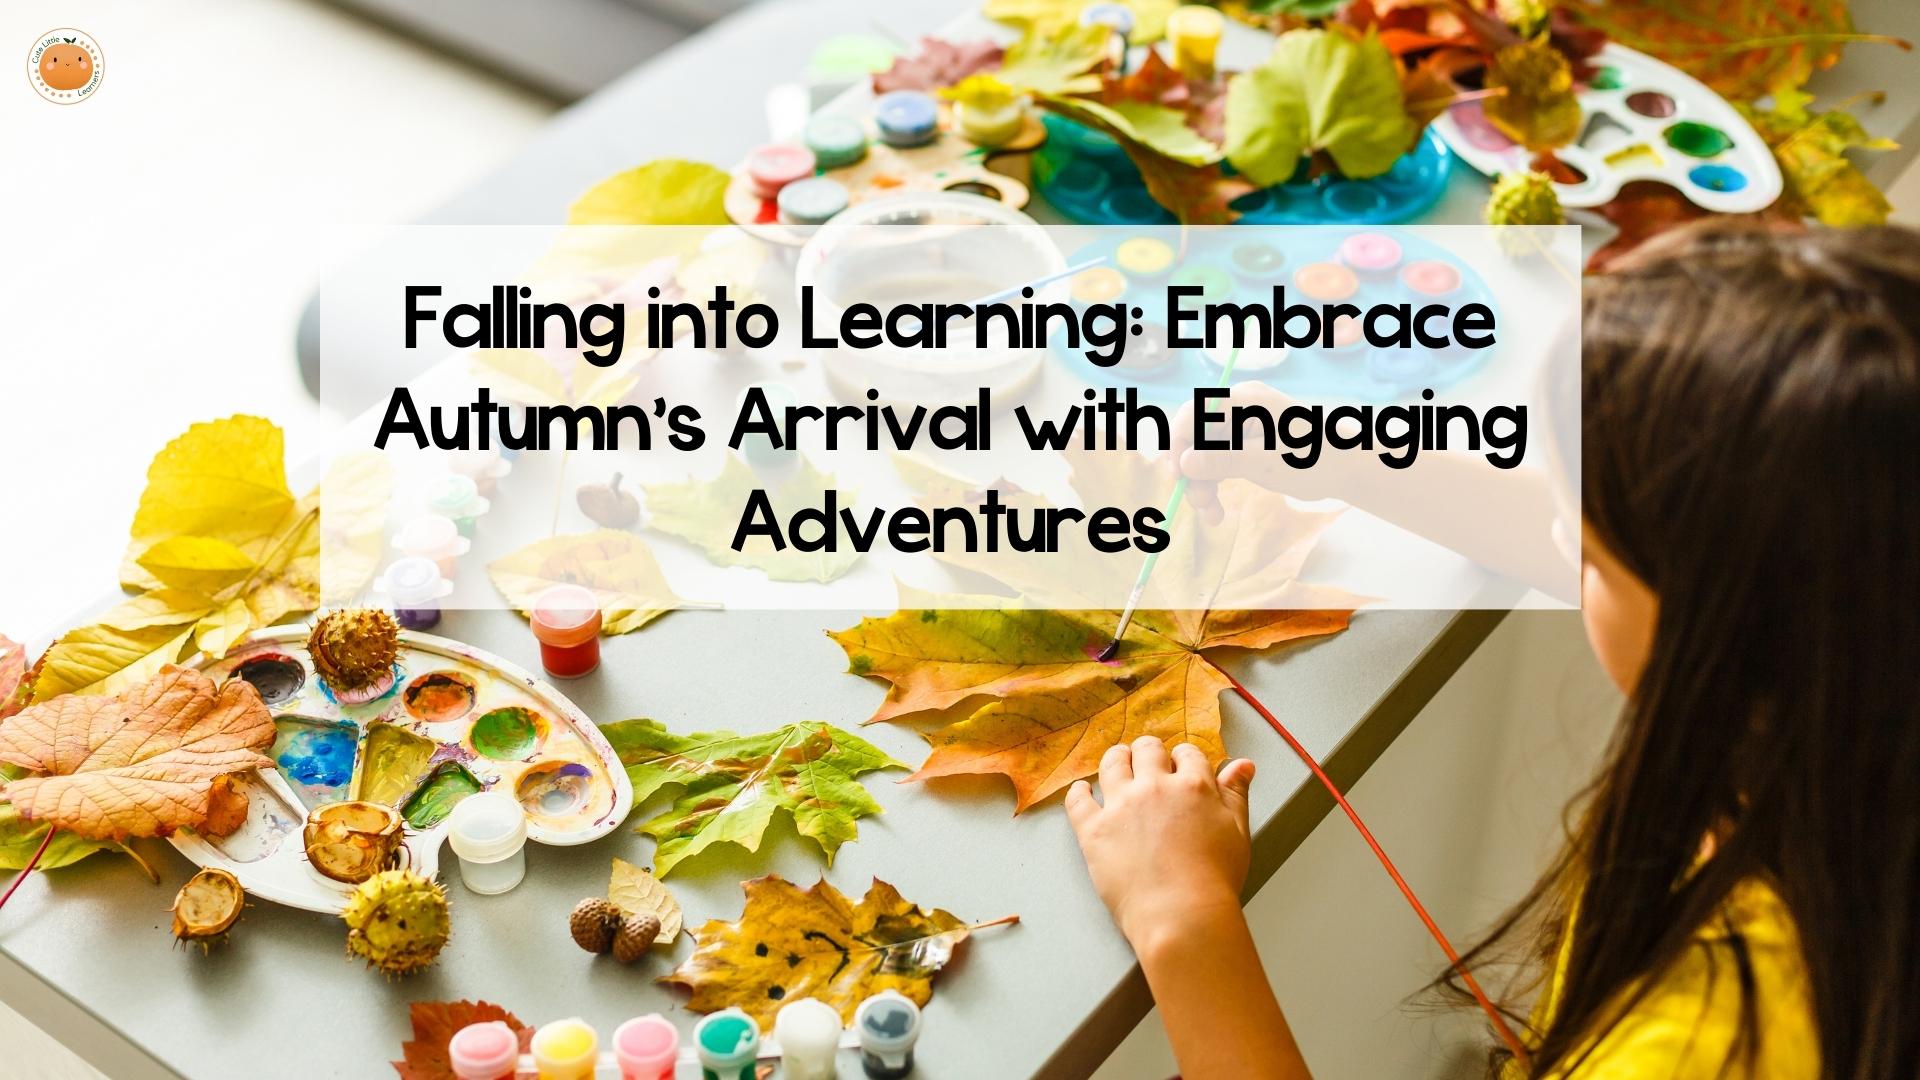 Fall into Learning: Embrace Autumn's Arrival with Engaging Adventures